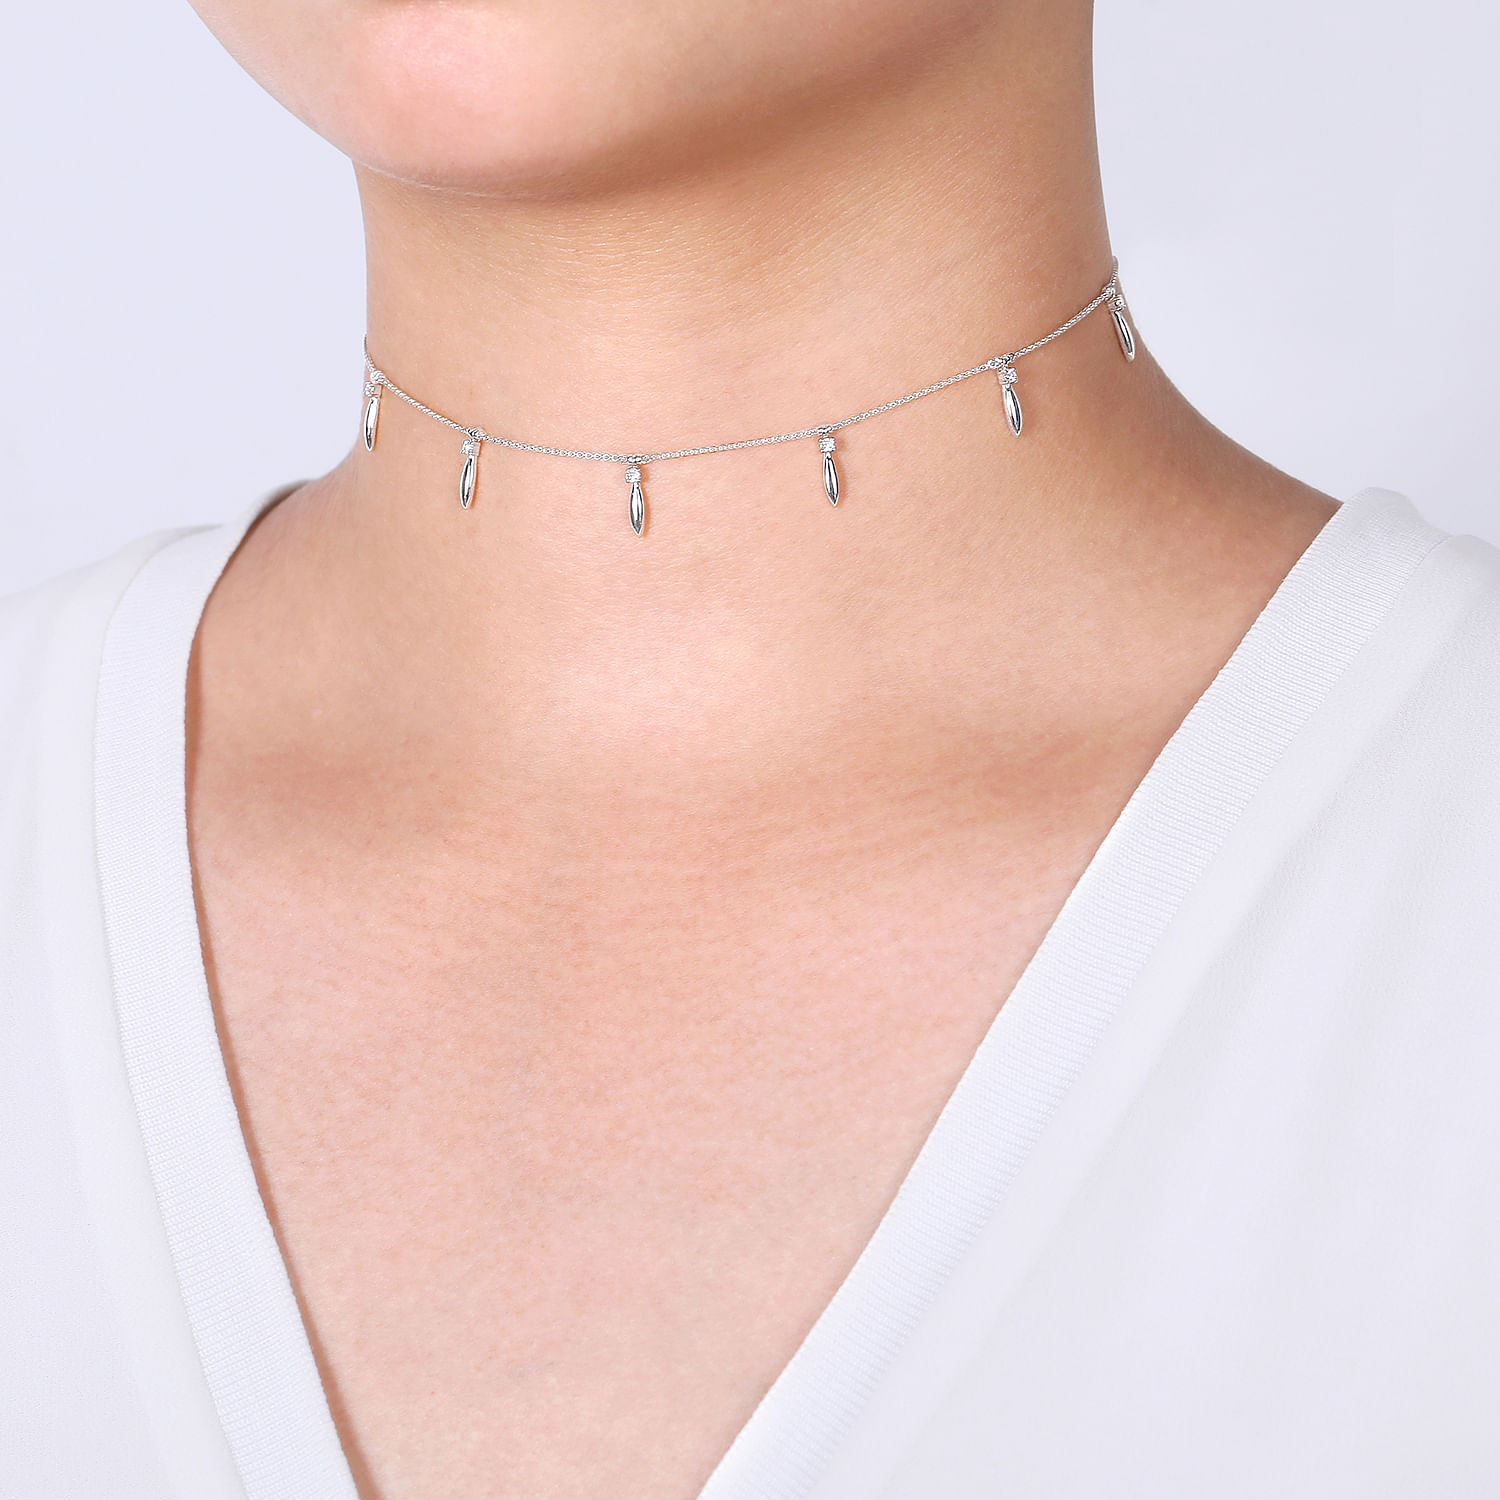 14K White Gold Choker Necklace with Diamond and Spike Drops